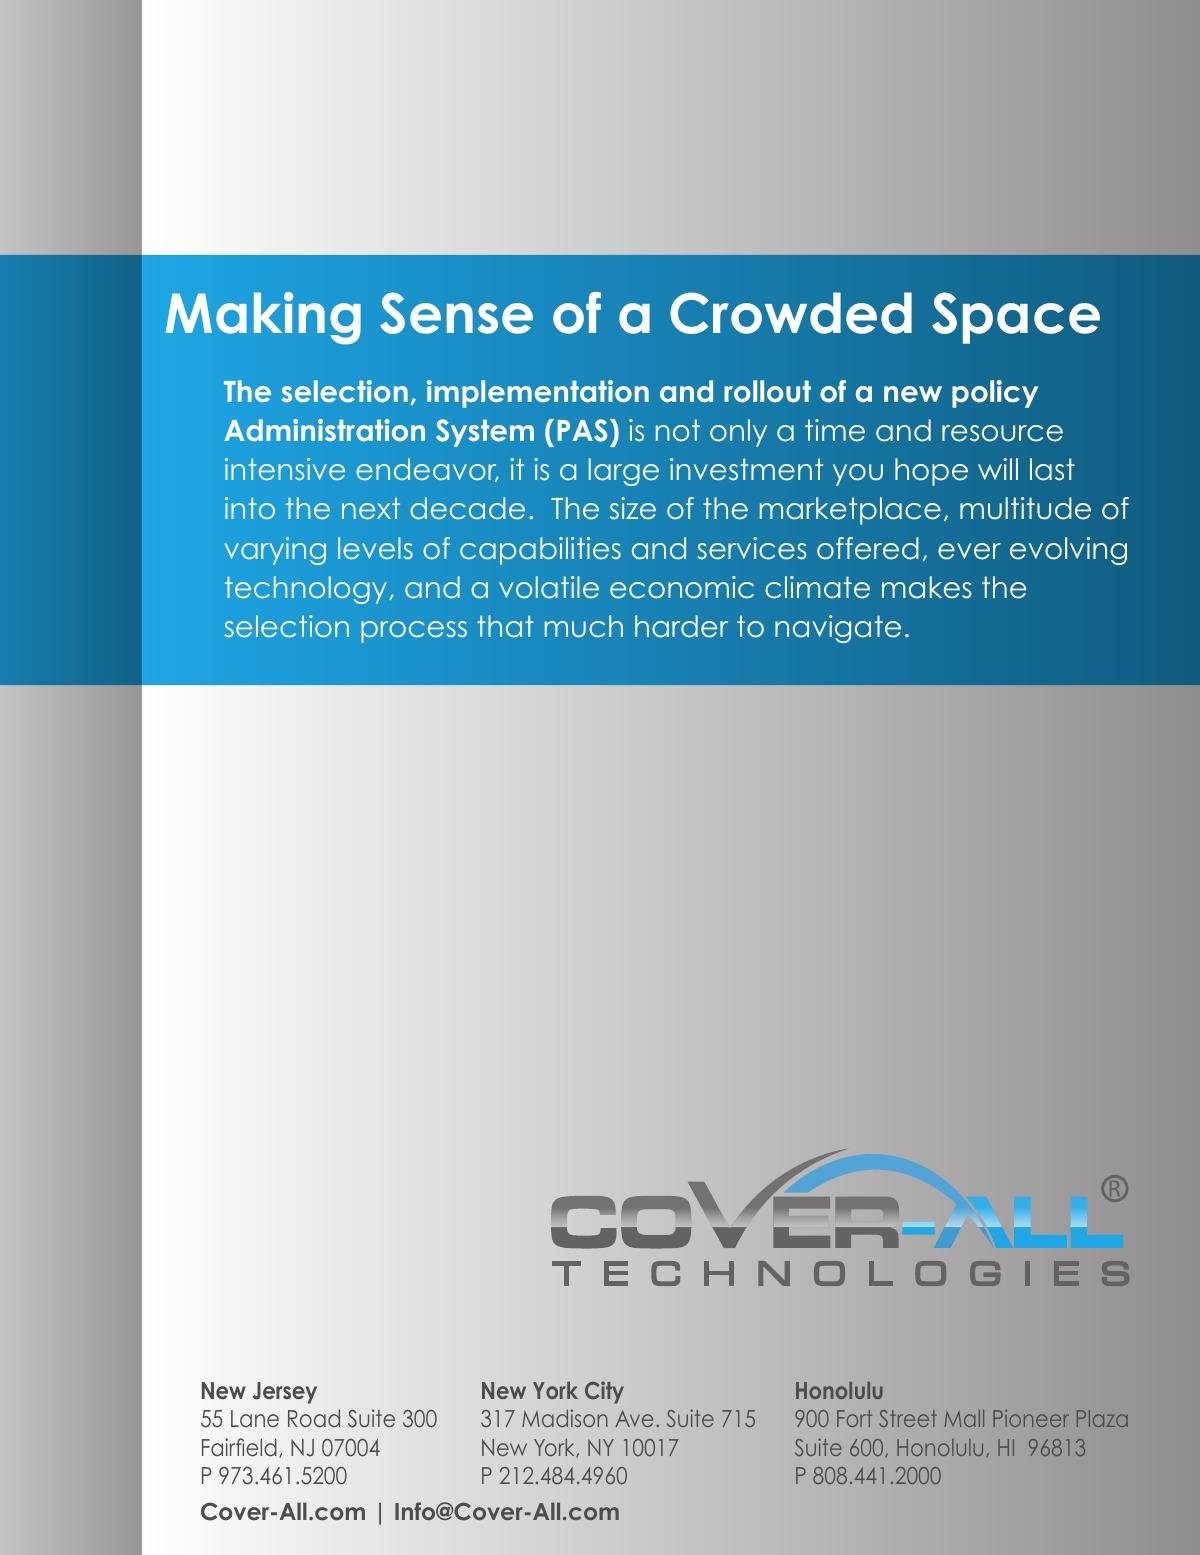 Making sense of a crowded space